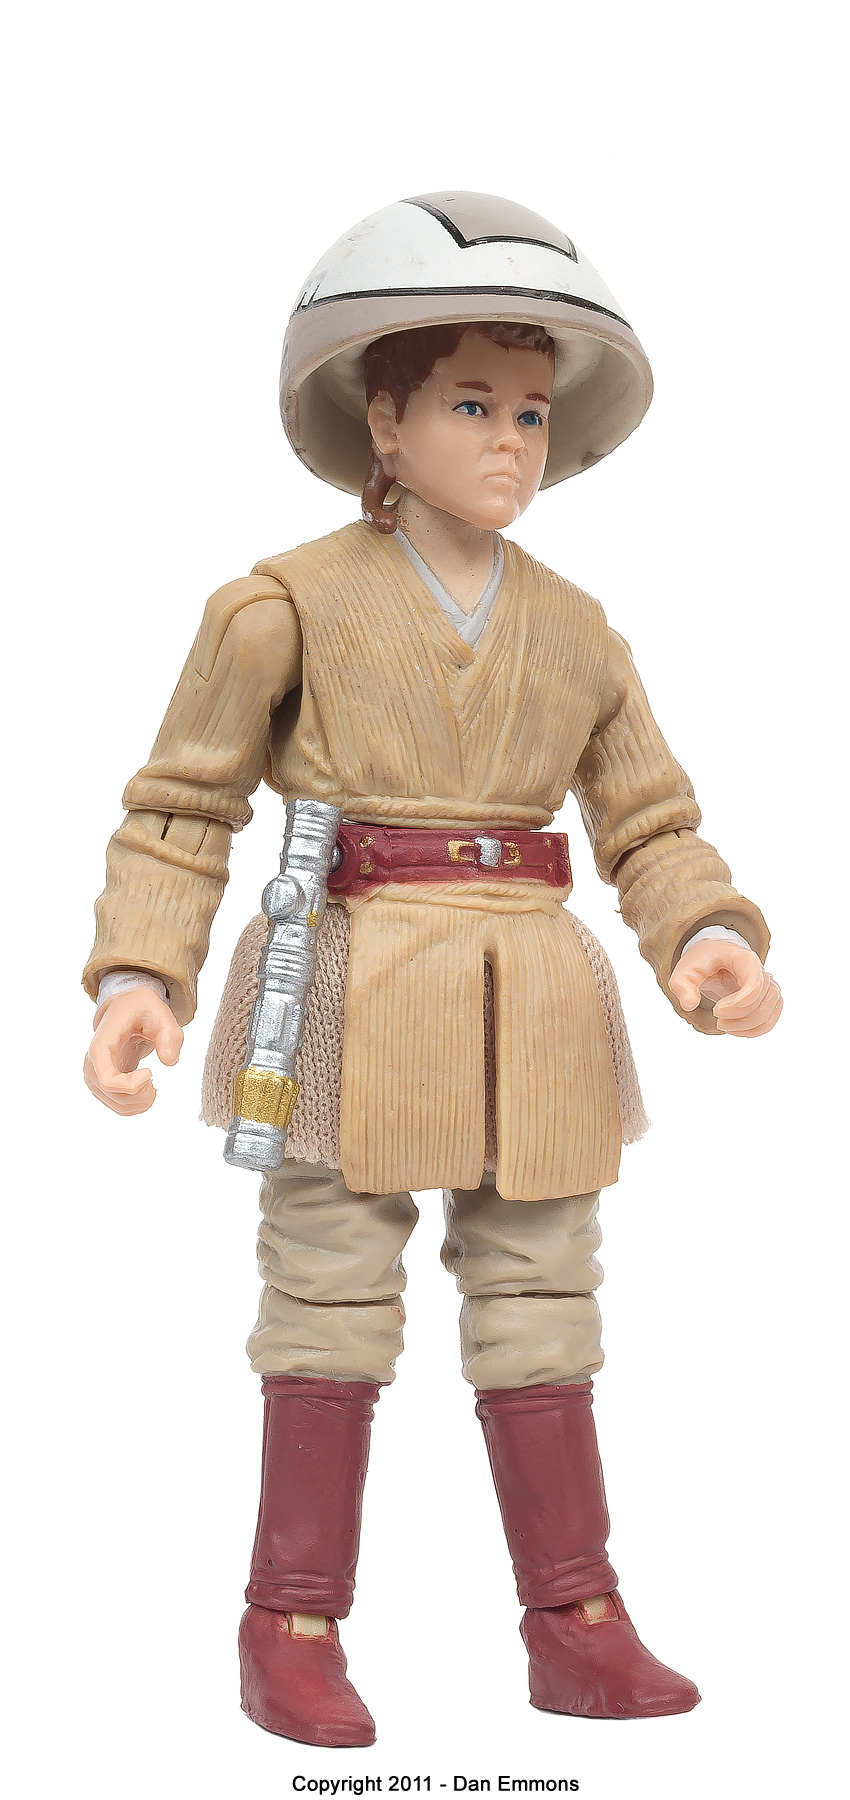 The Vintage Collection - VC80: Anakin Skywalker